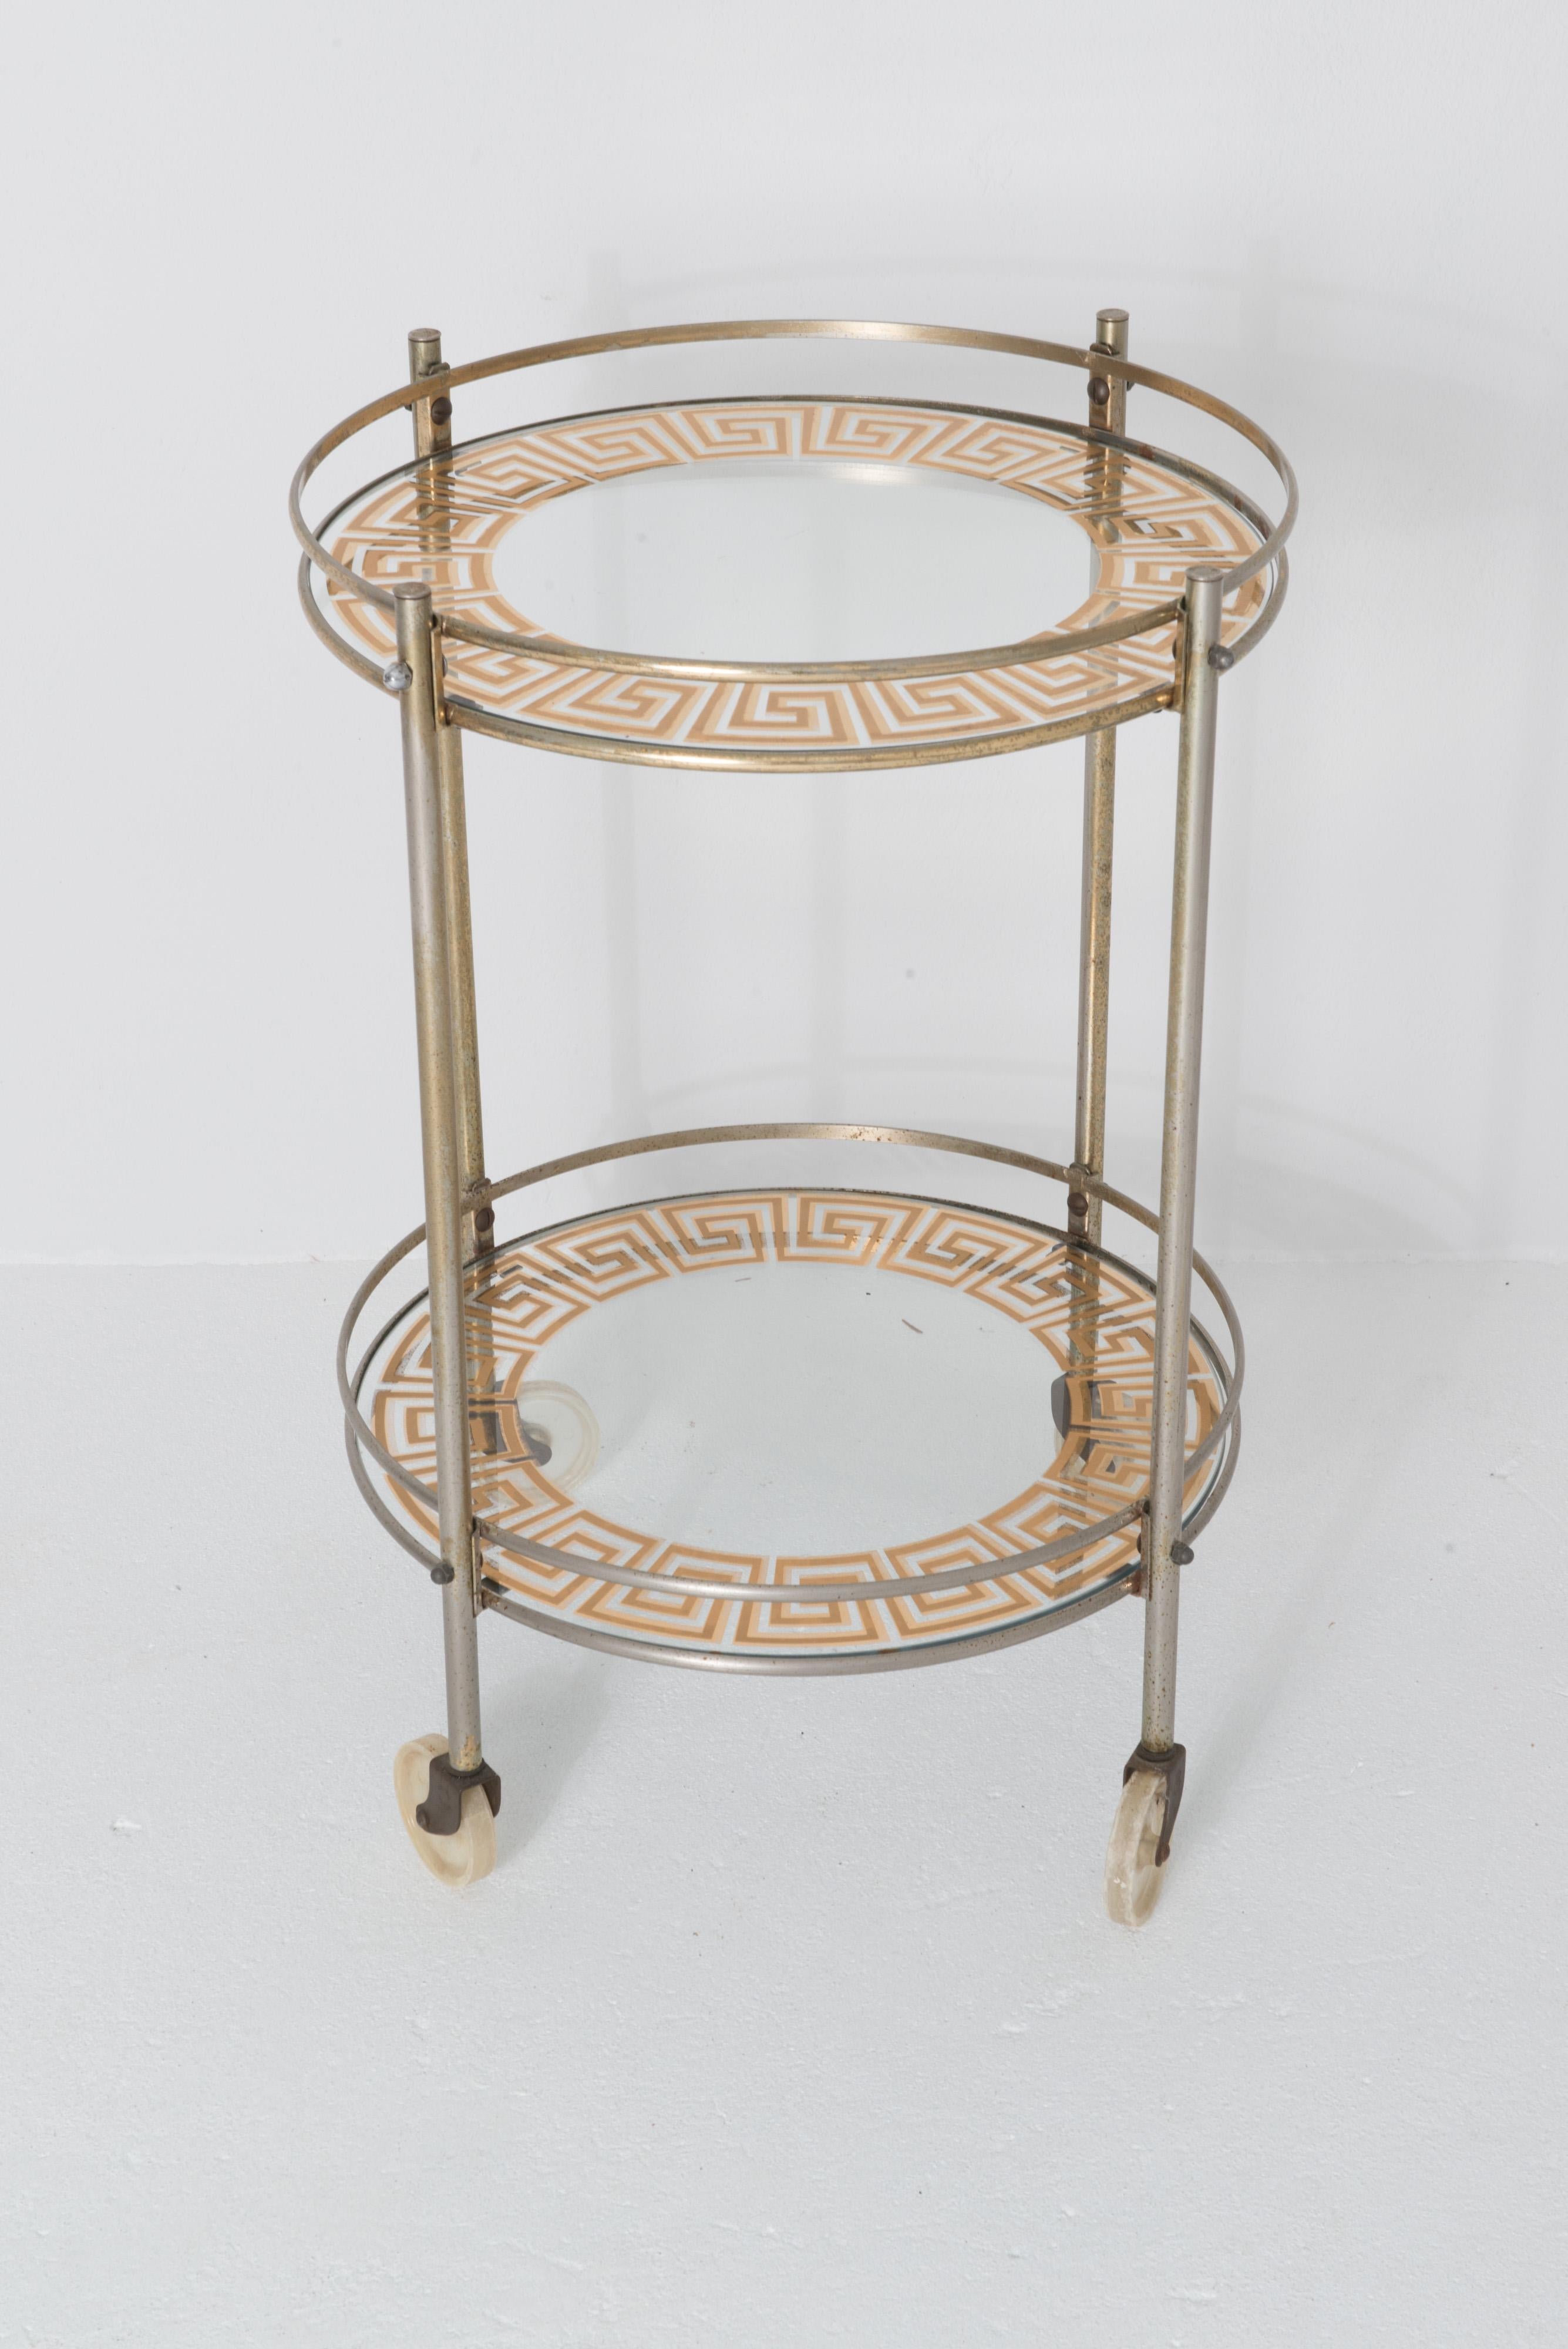 Mid century modern circular Greek Key glass and brass bar cart with clear plastic caster wheels.